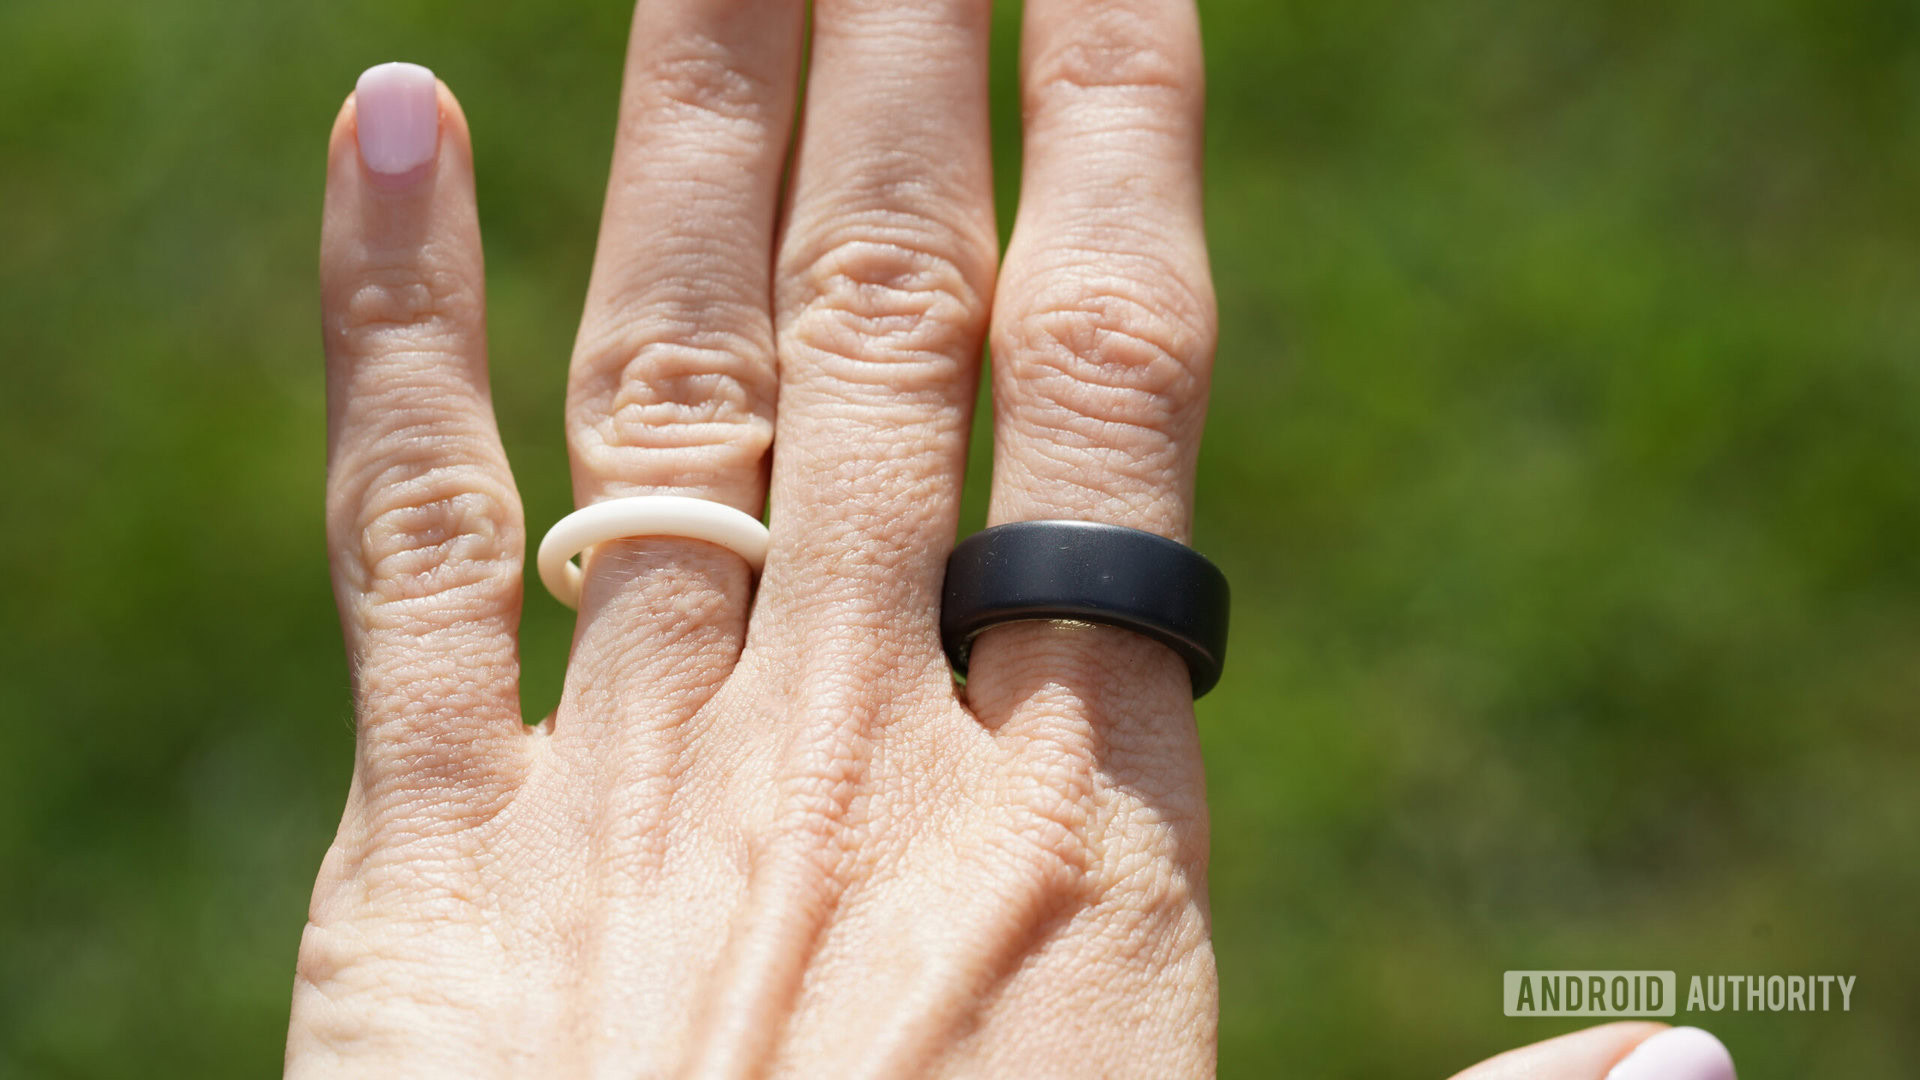 Oura Ring 4 wishlist: All the features I want to see